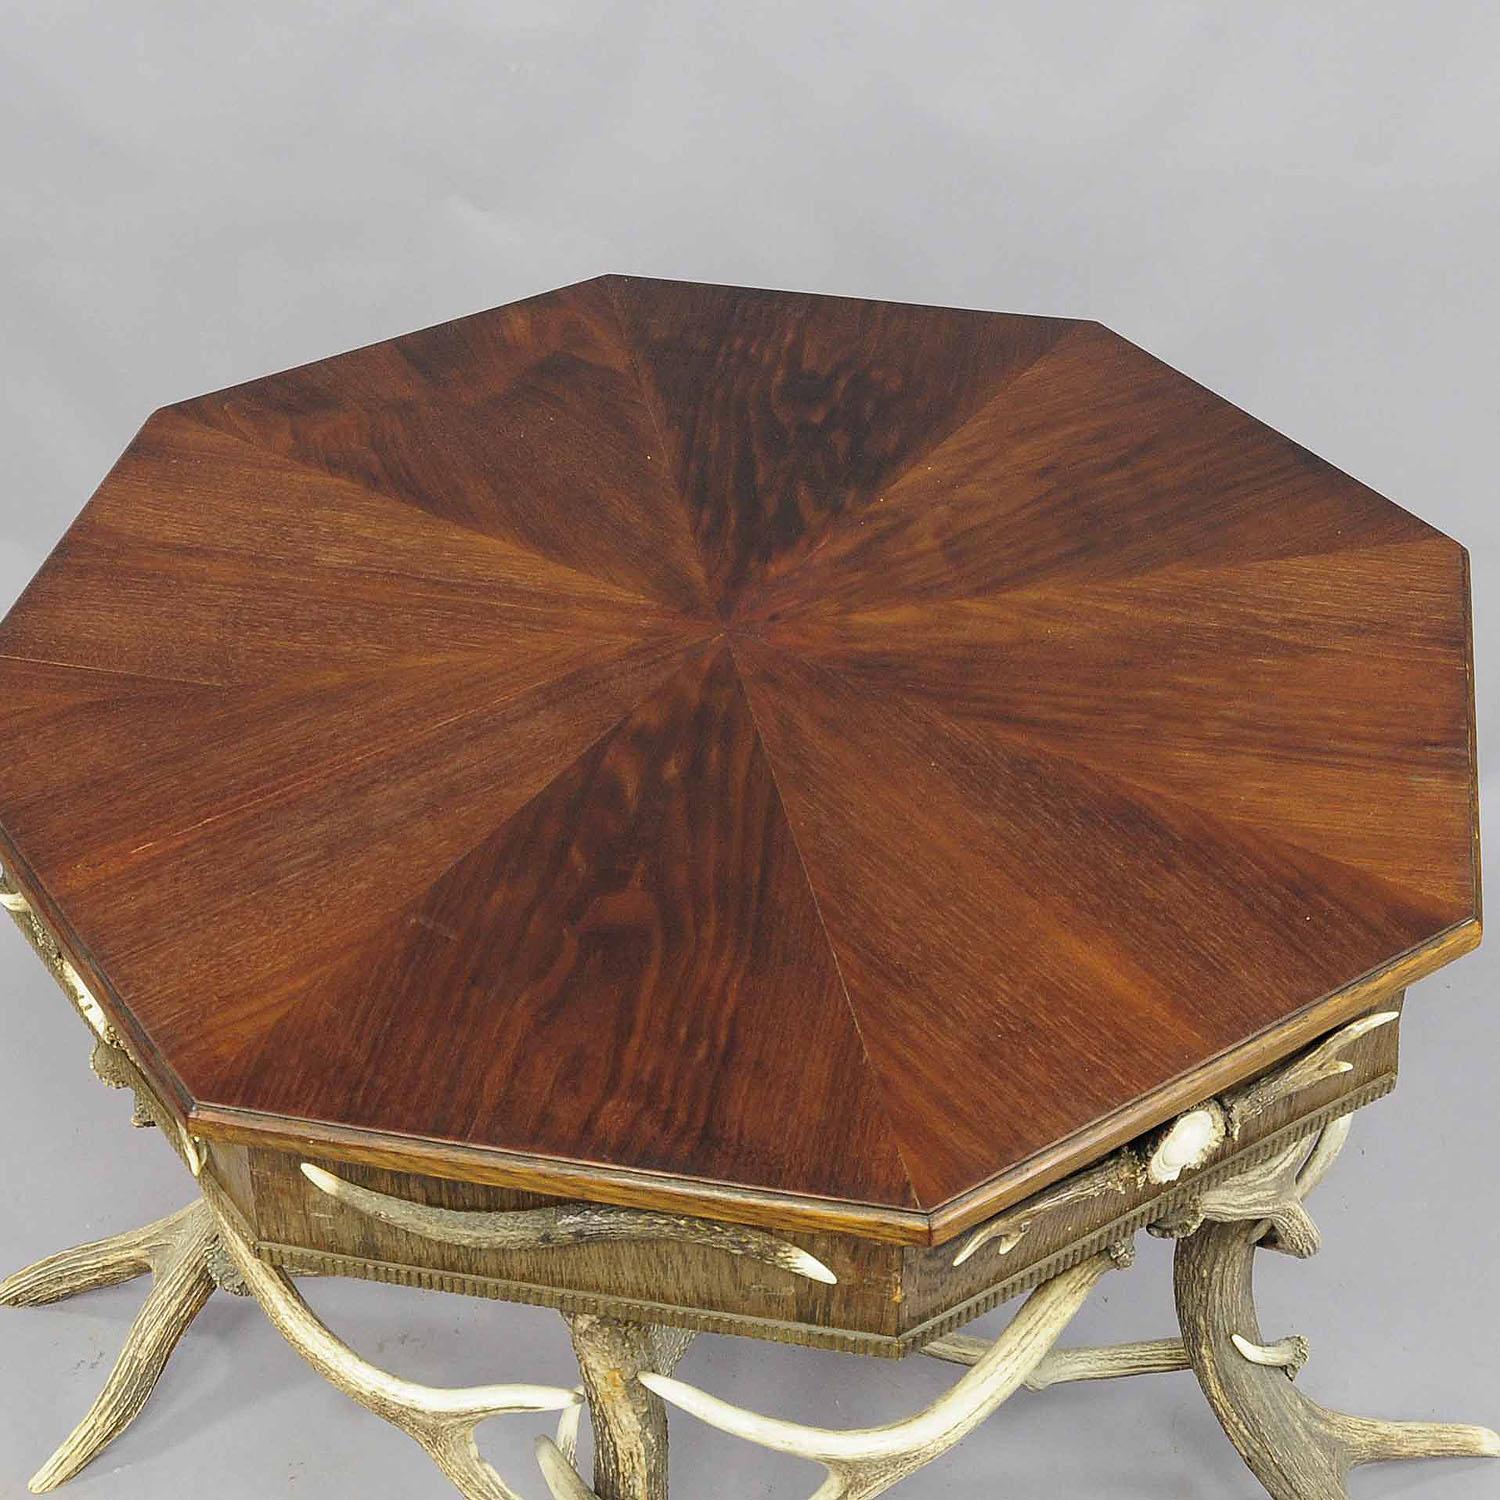 Antique Black Forest Rustic Antler Table ca. 1900 In Good Condition For Sale In Berghuelen, DE